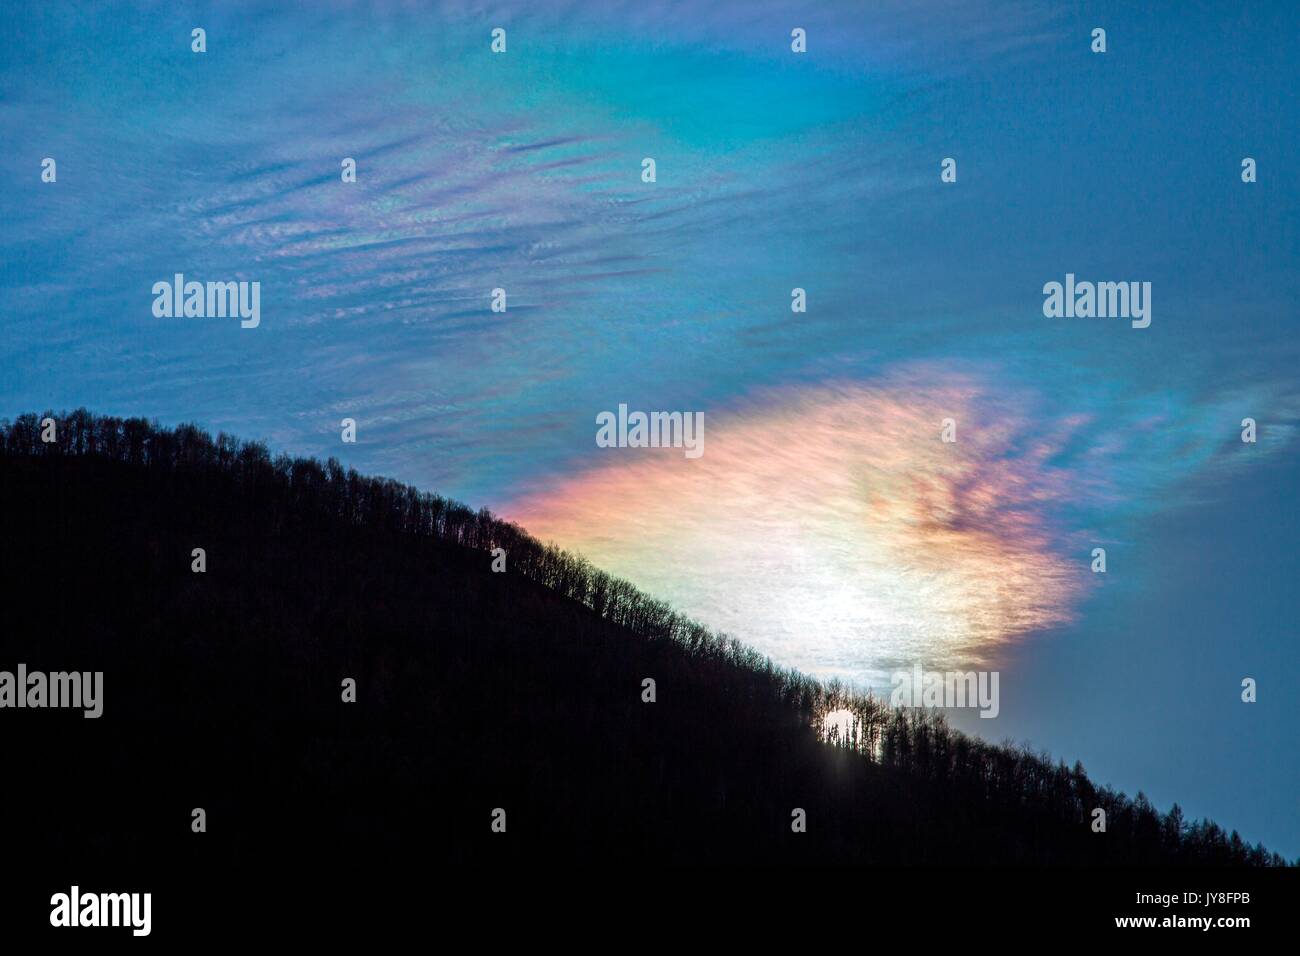 A lonely cloud with iridescence paints the sky with the colors of the rainbow Valtellina Lombardy Italy Europe Stock Photo